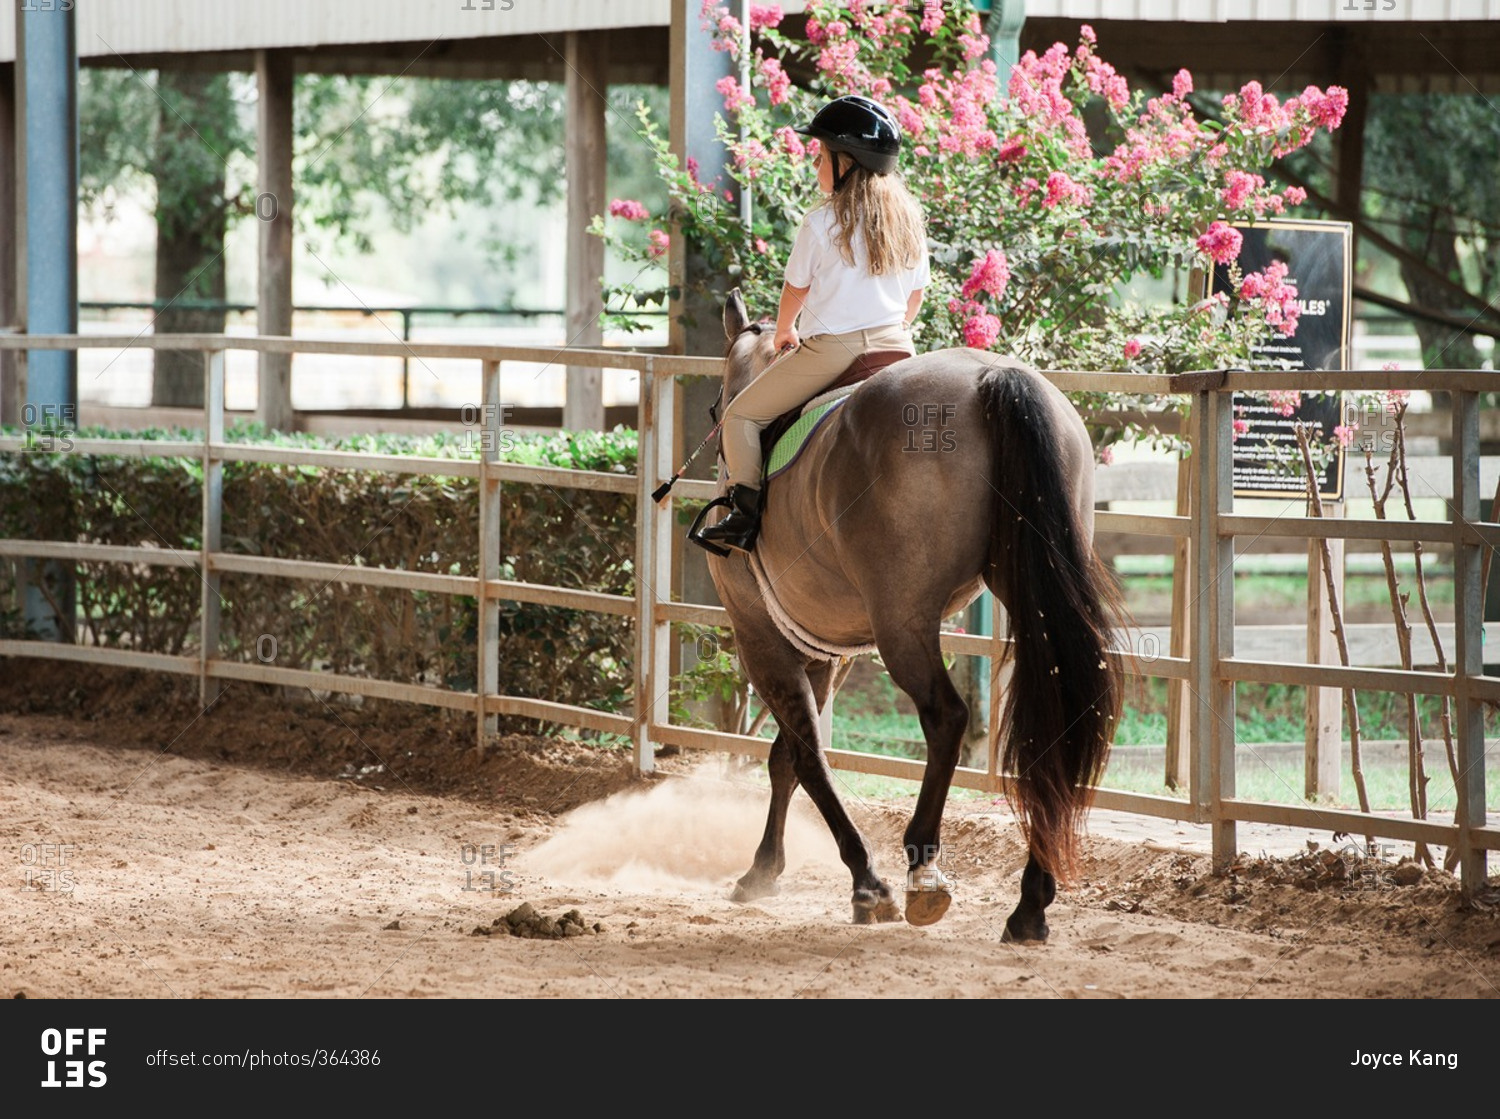 Girl riding her horse into an equestrian arena